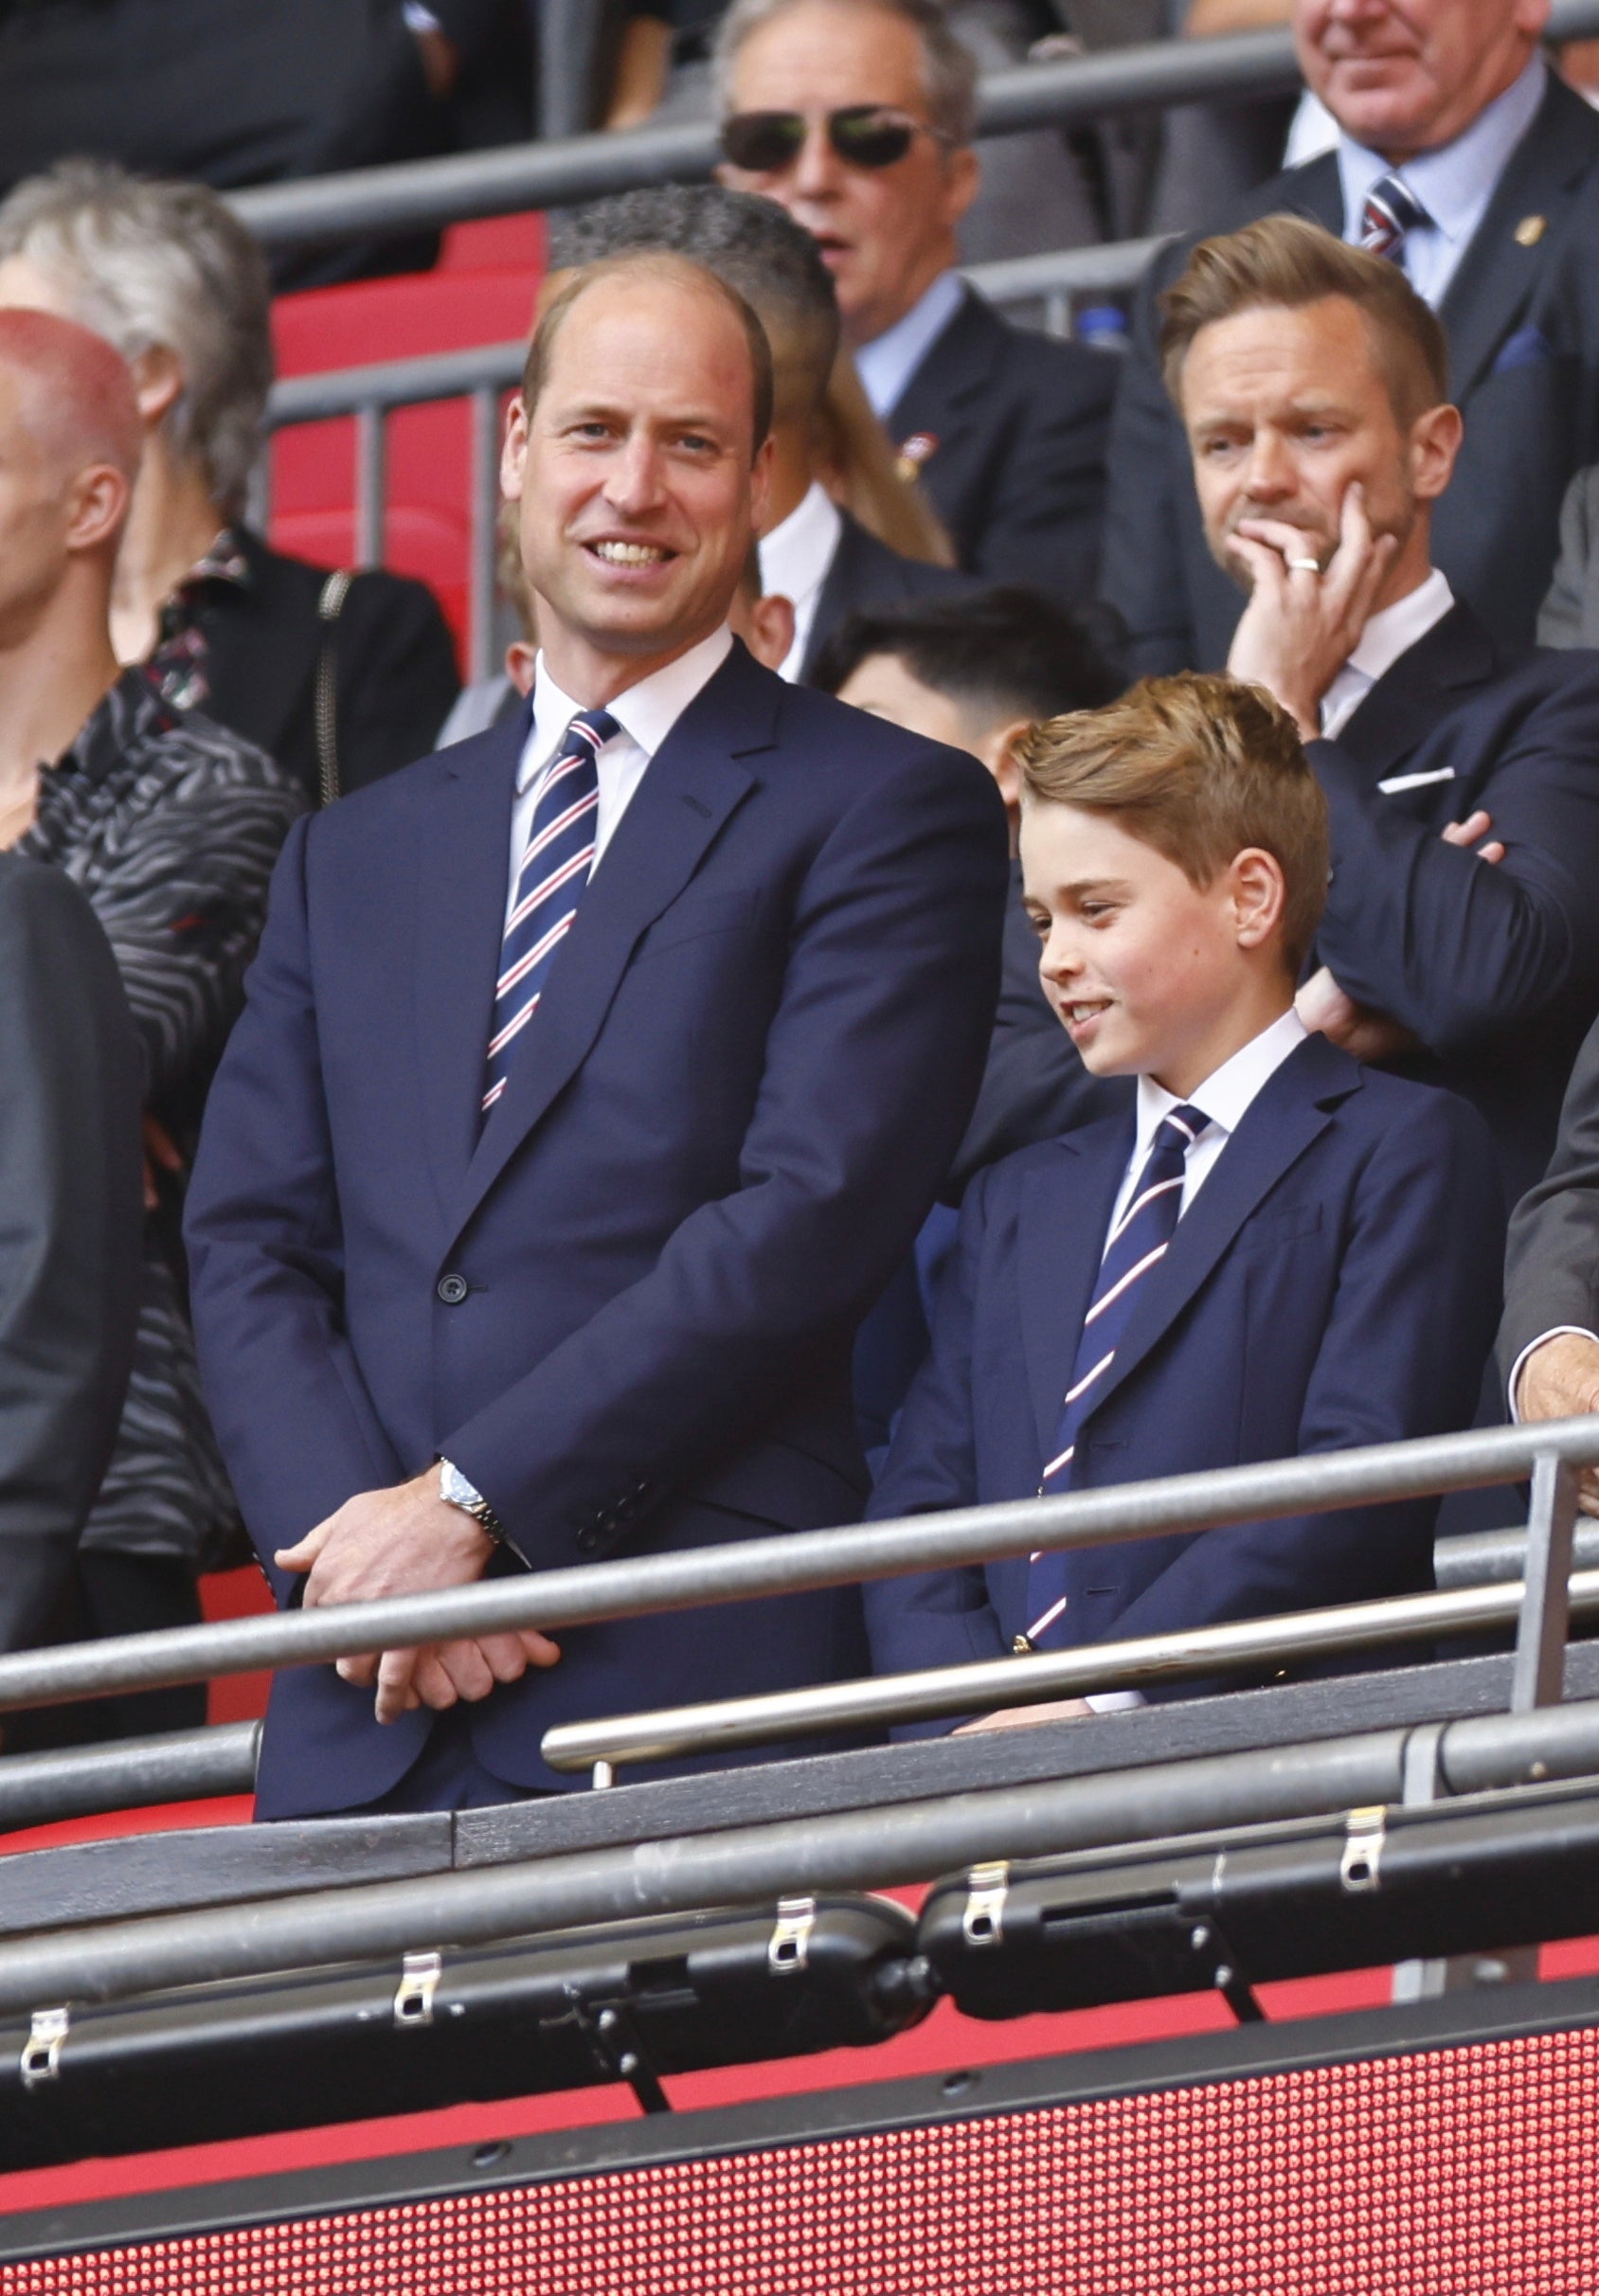 Prince William and Prince George will reportedly play key roles in the upcoming ceremony.